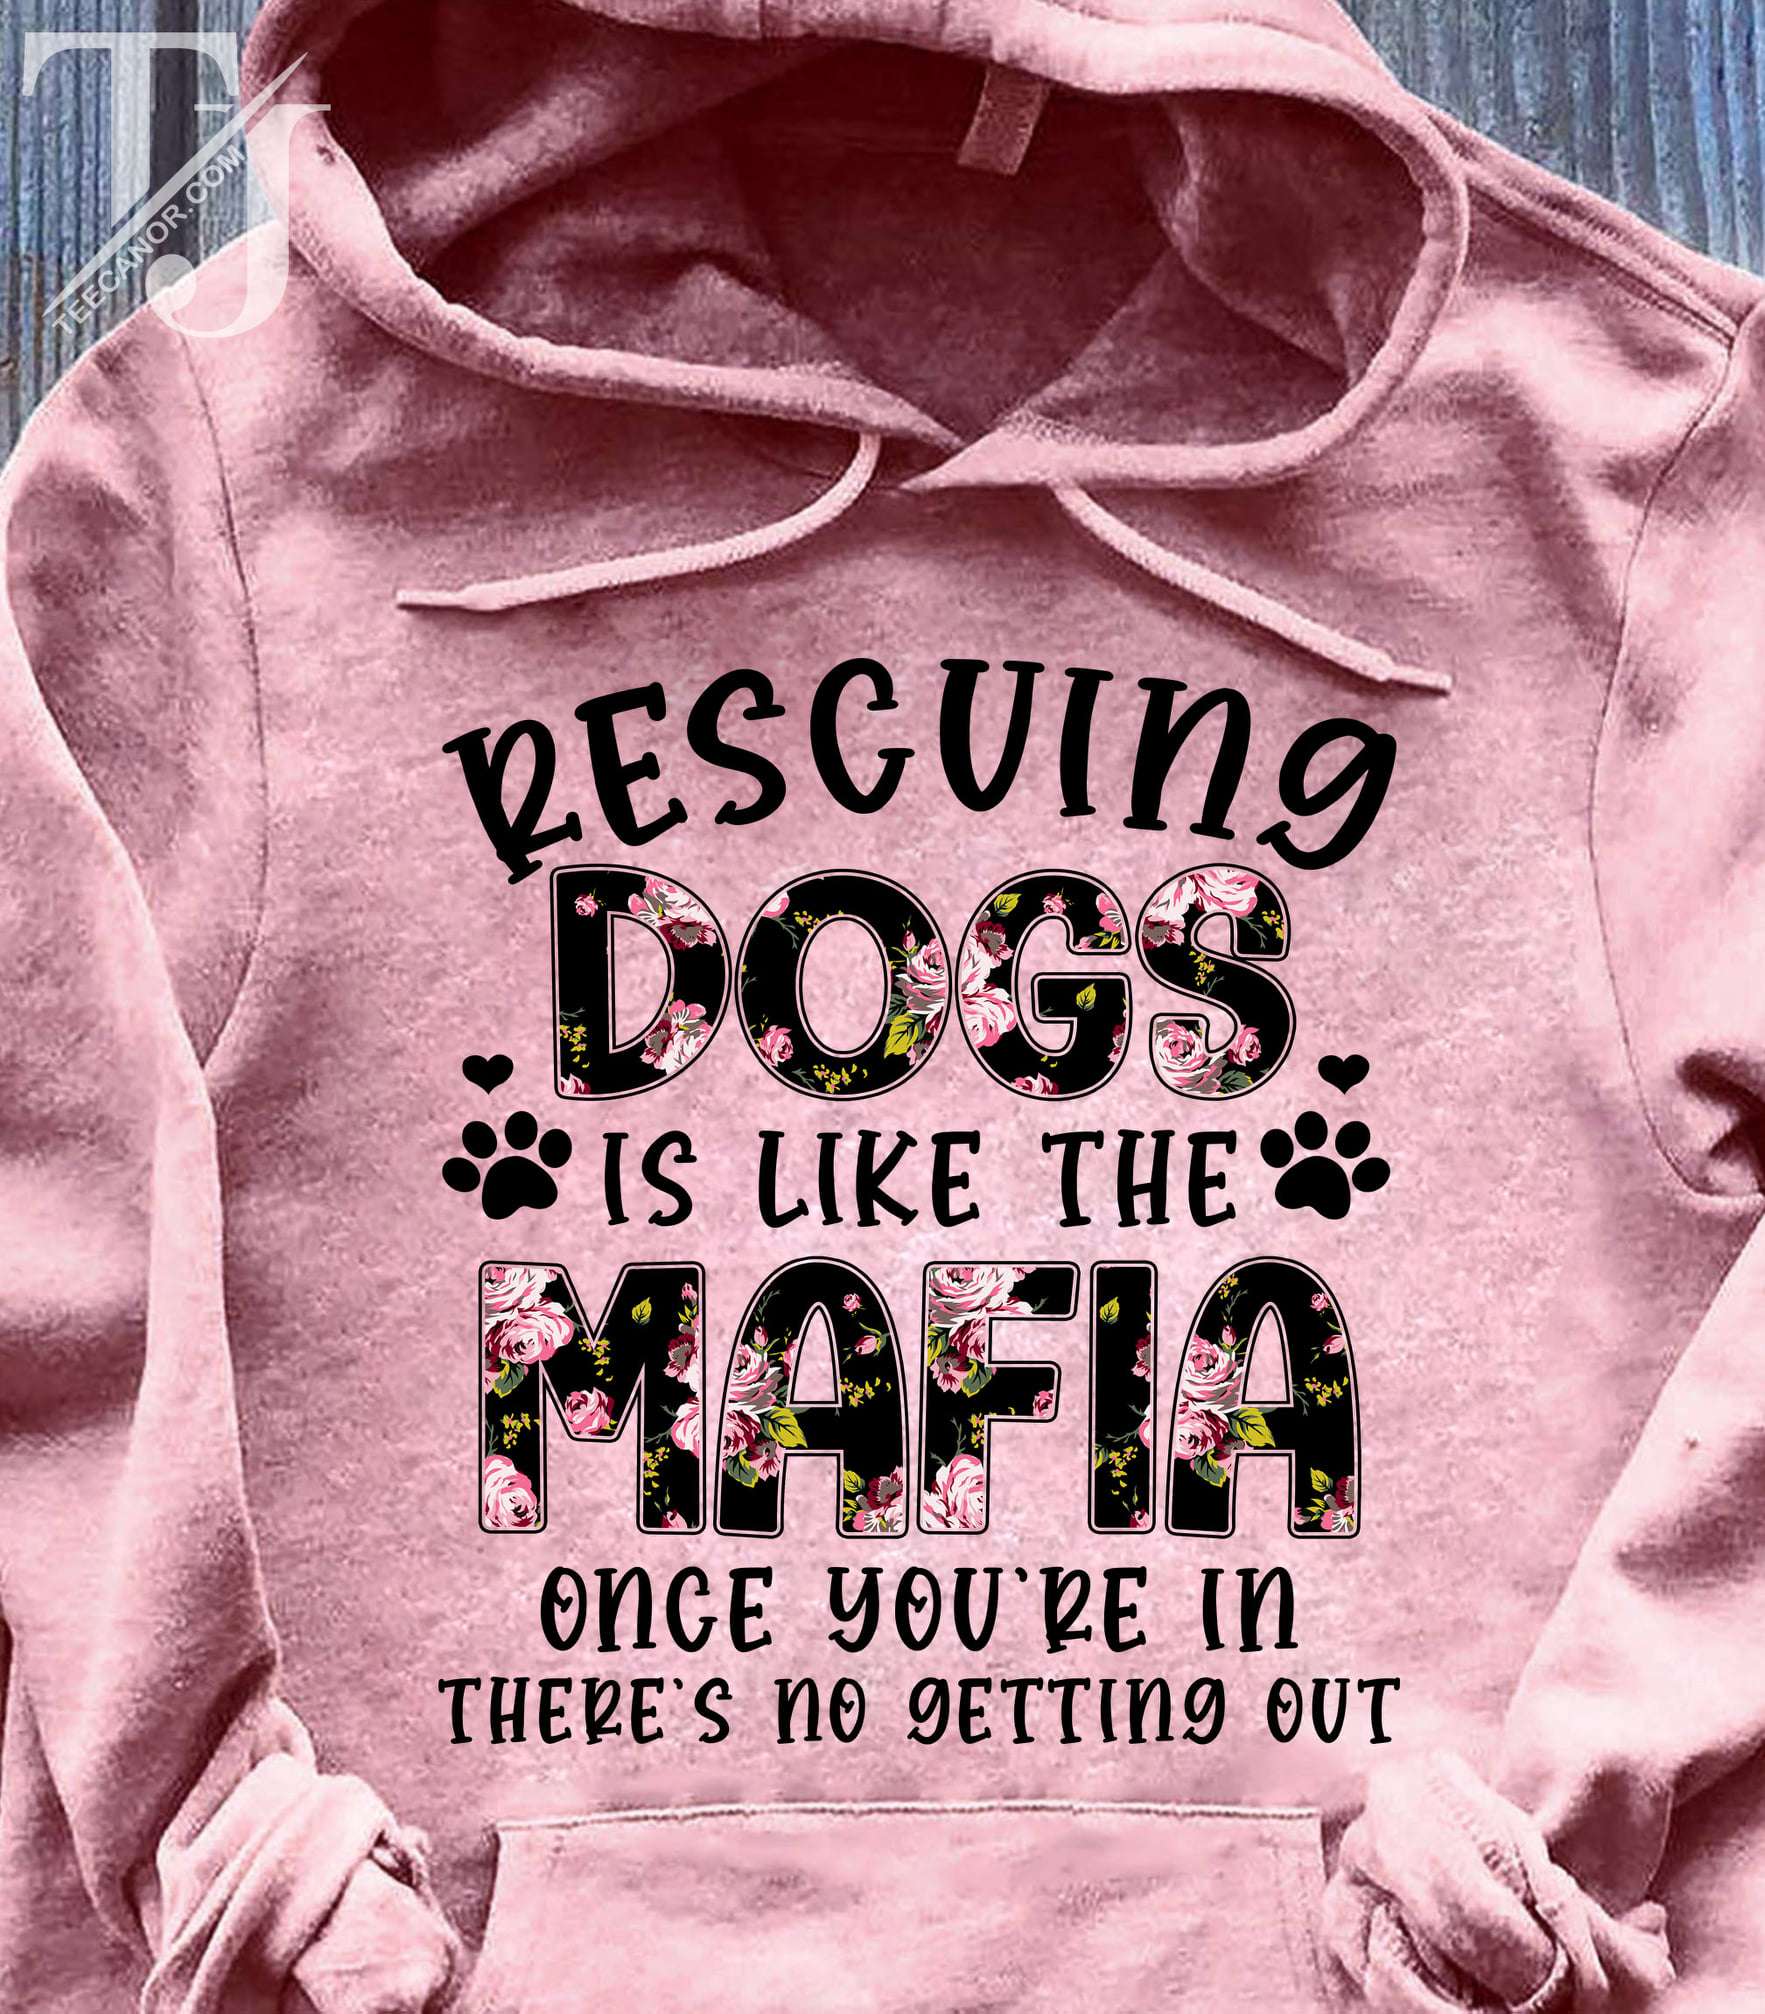 Rescuing dogs is like the mafia once you're in there's no getting out